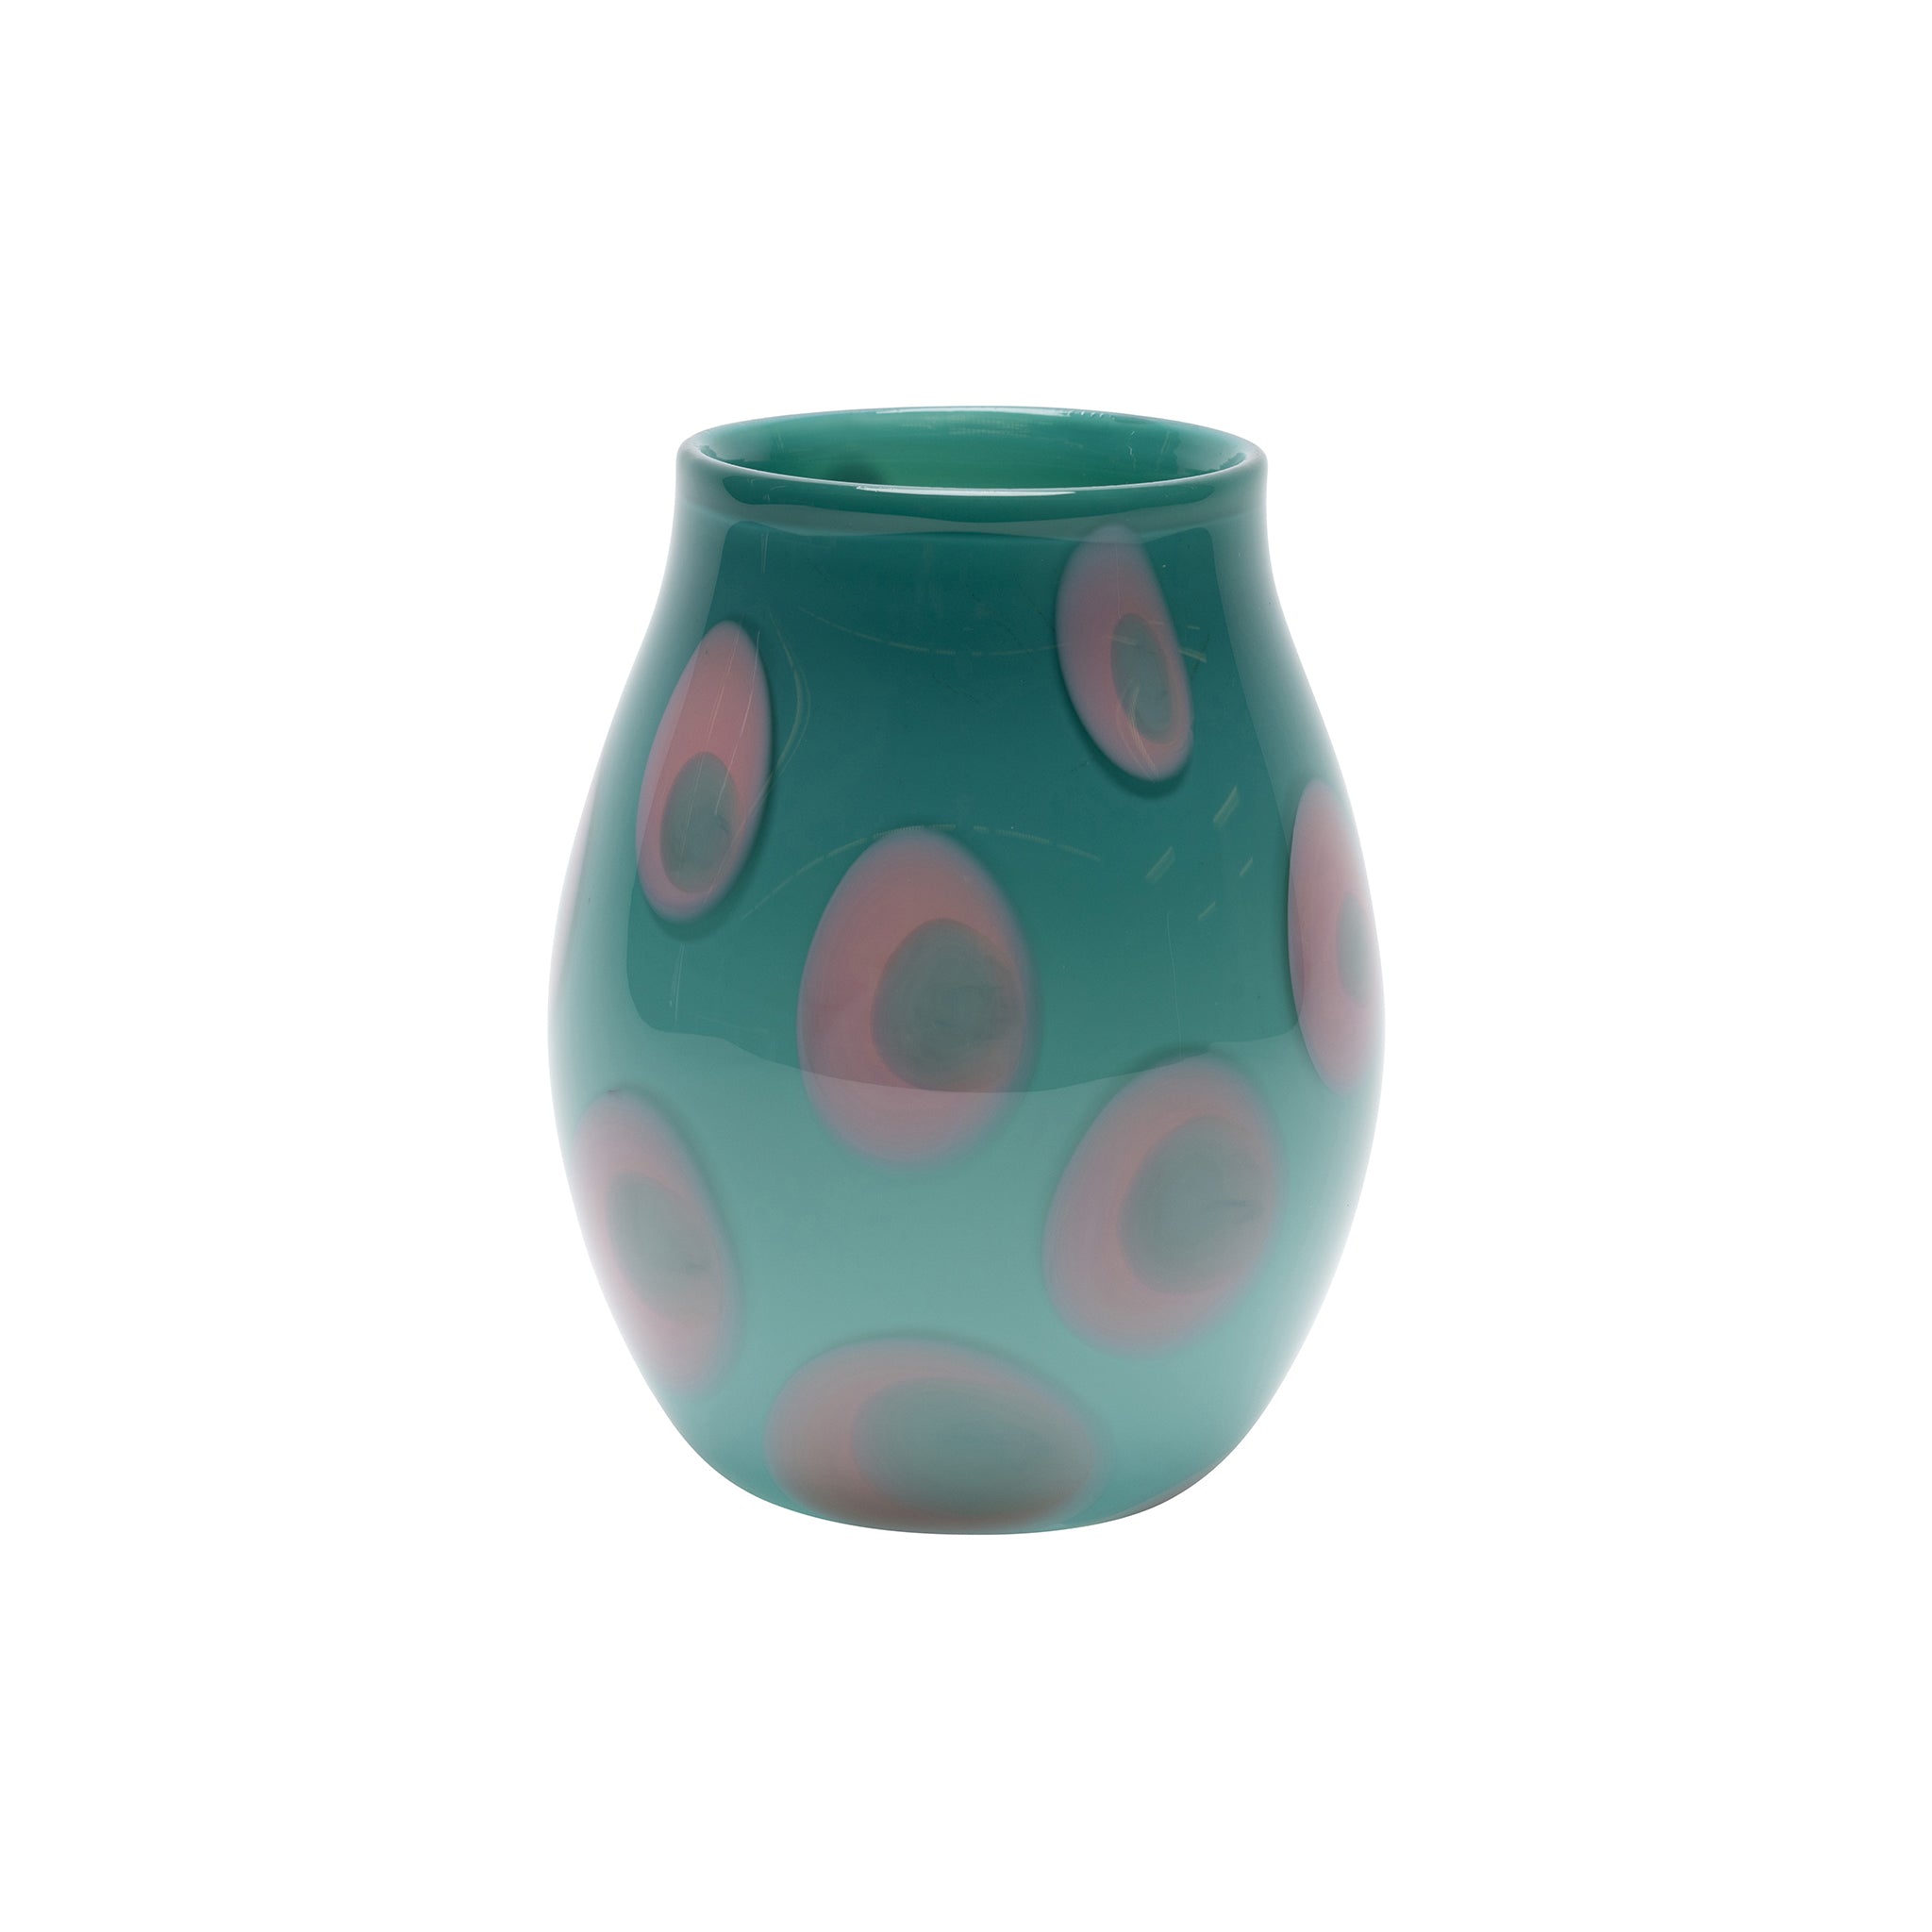 Teal Vase with Pink and Teal Spots